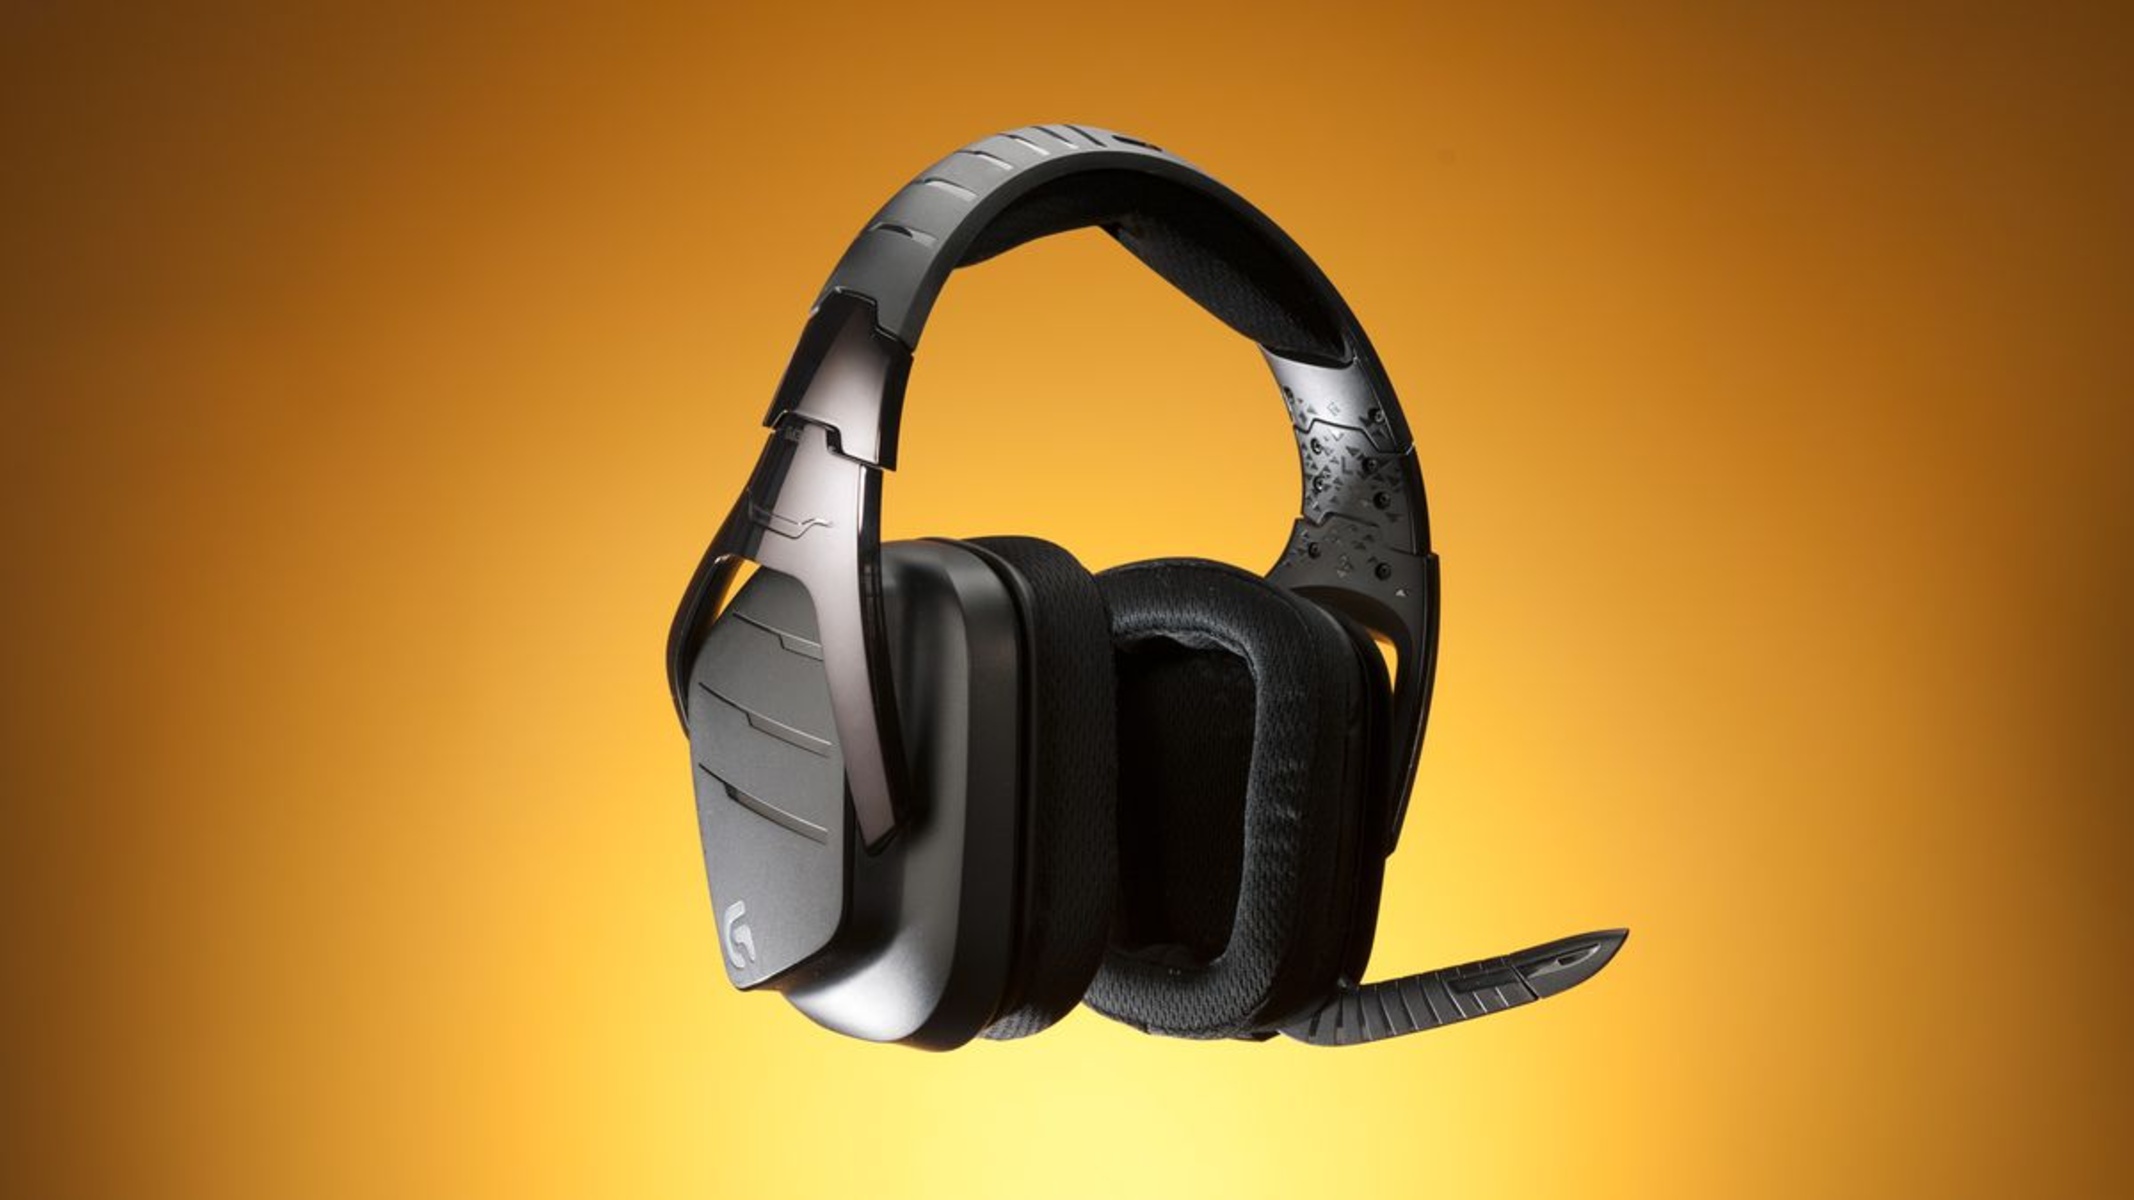 When G633 Artemis Spectrum Gaming Headset Is Set To A 96K Sample Rate In Windows